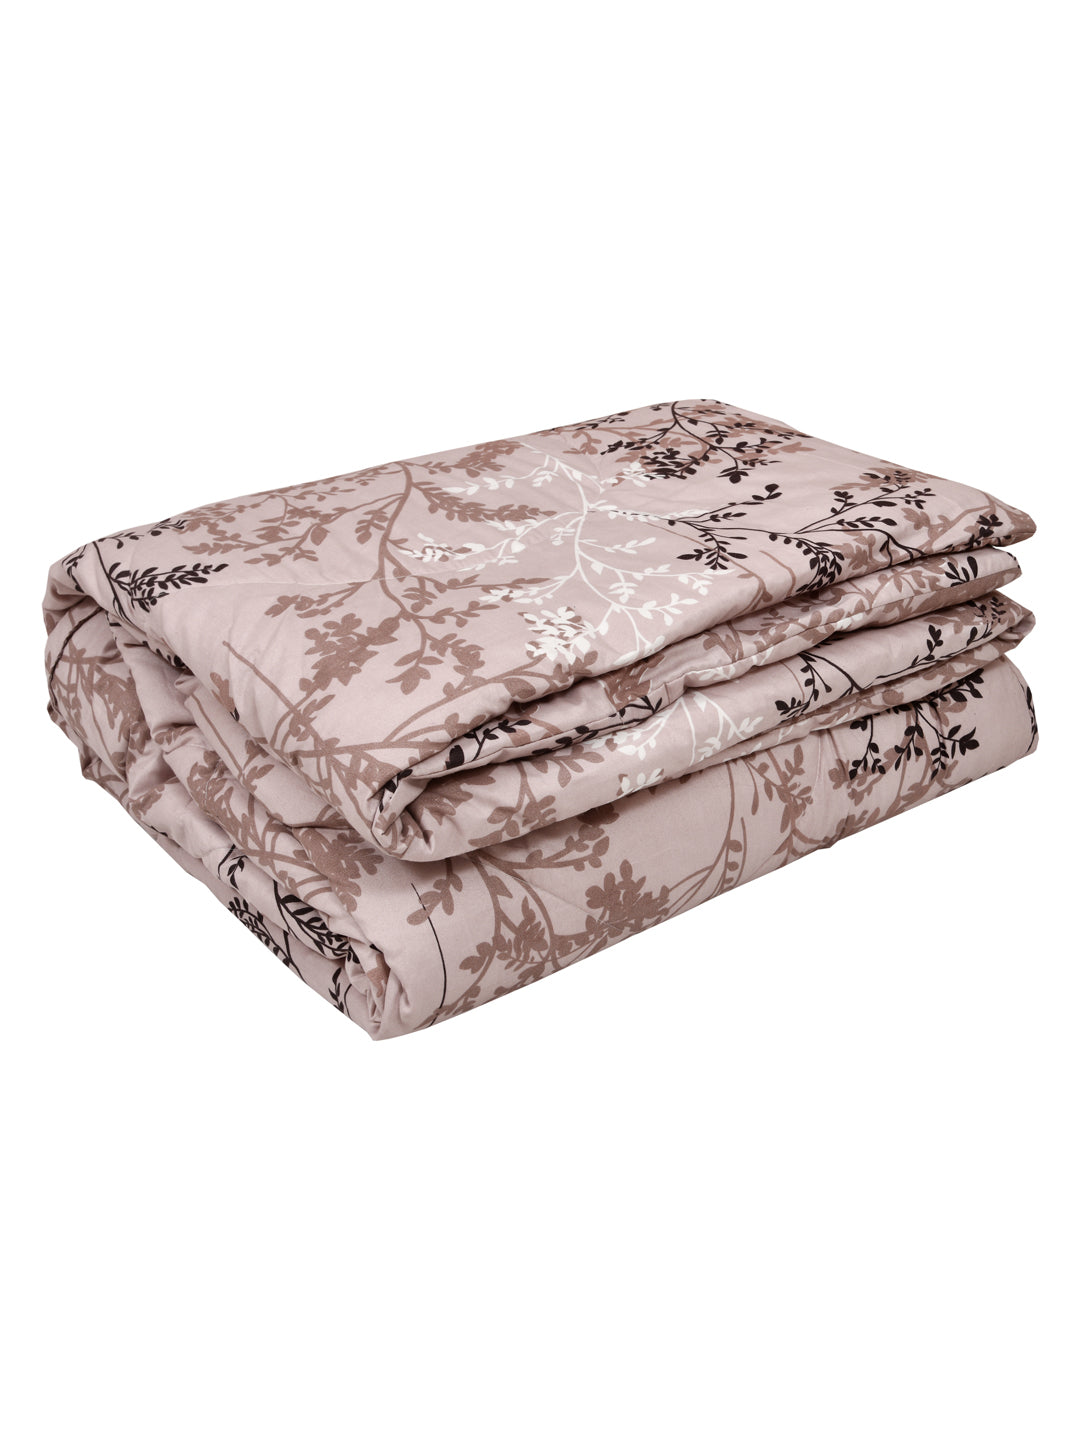 Pink and Brown Floral Print Double bed AC Comforter